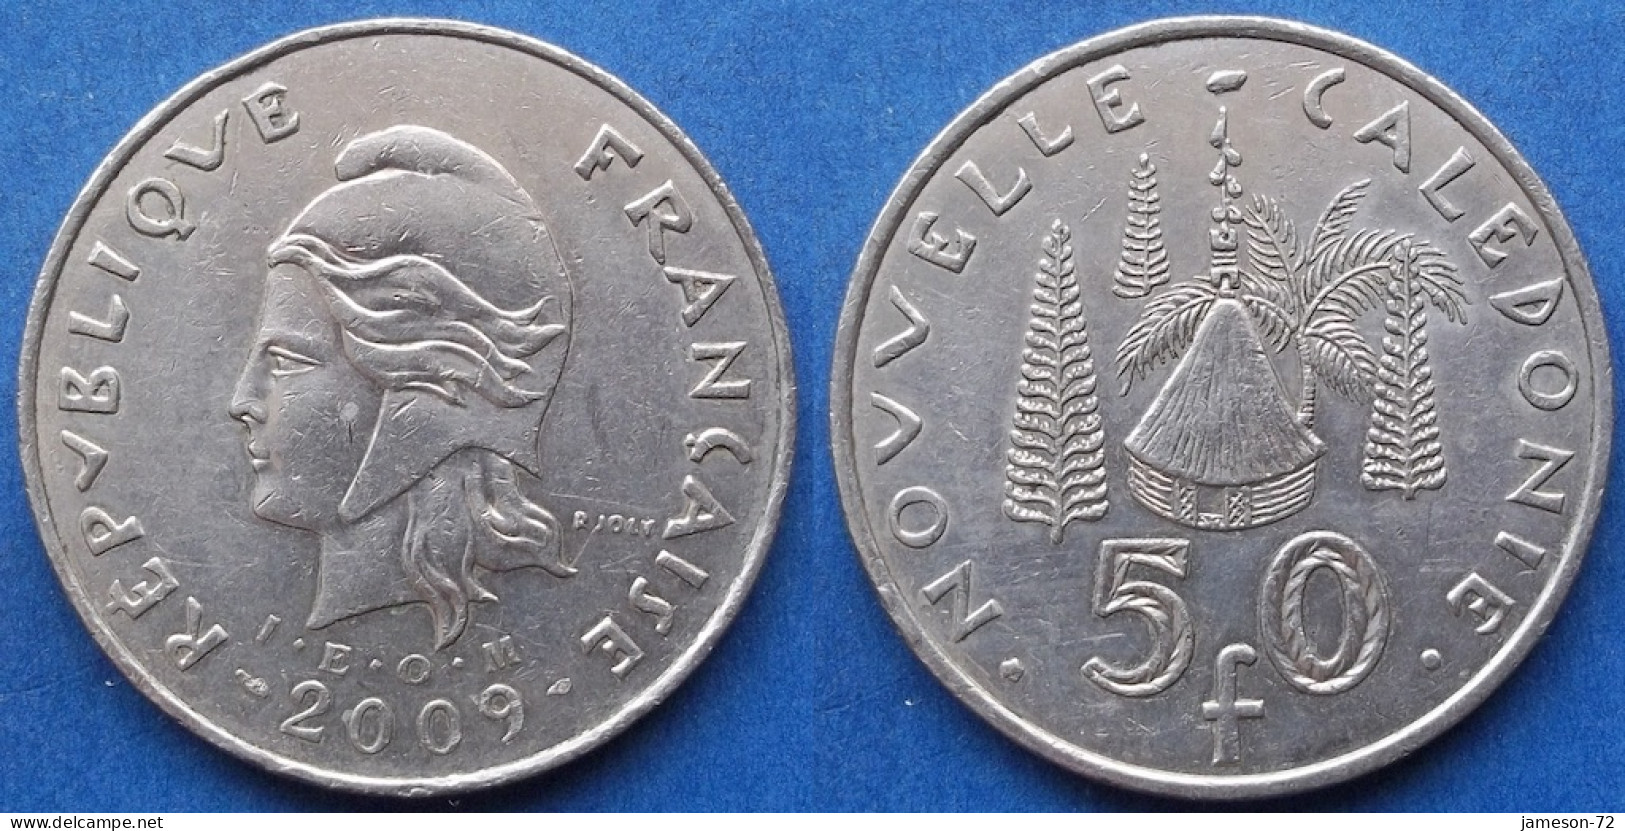 NEW CALEDONIA - 50 Francs 2009 "Hut" KM# 13 French Associated State (1998) - Edelweiss Coins - Neu-Kaledonien